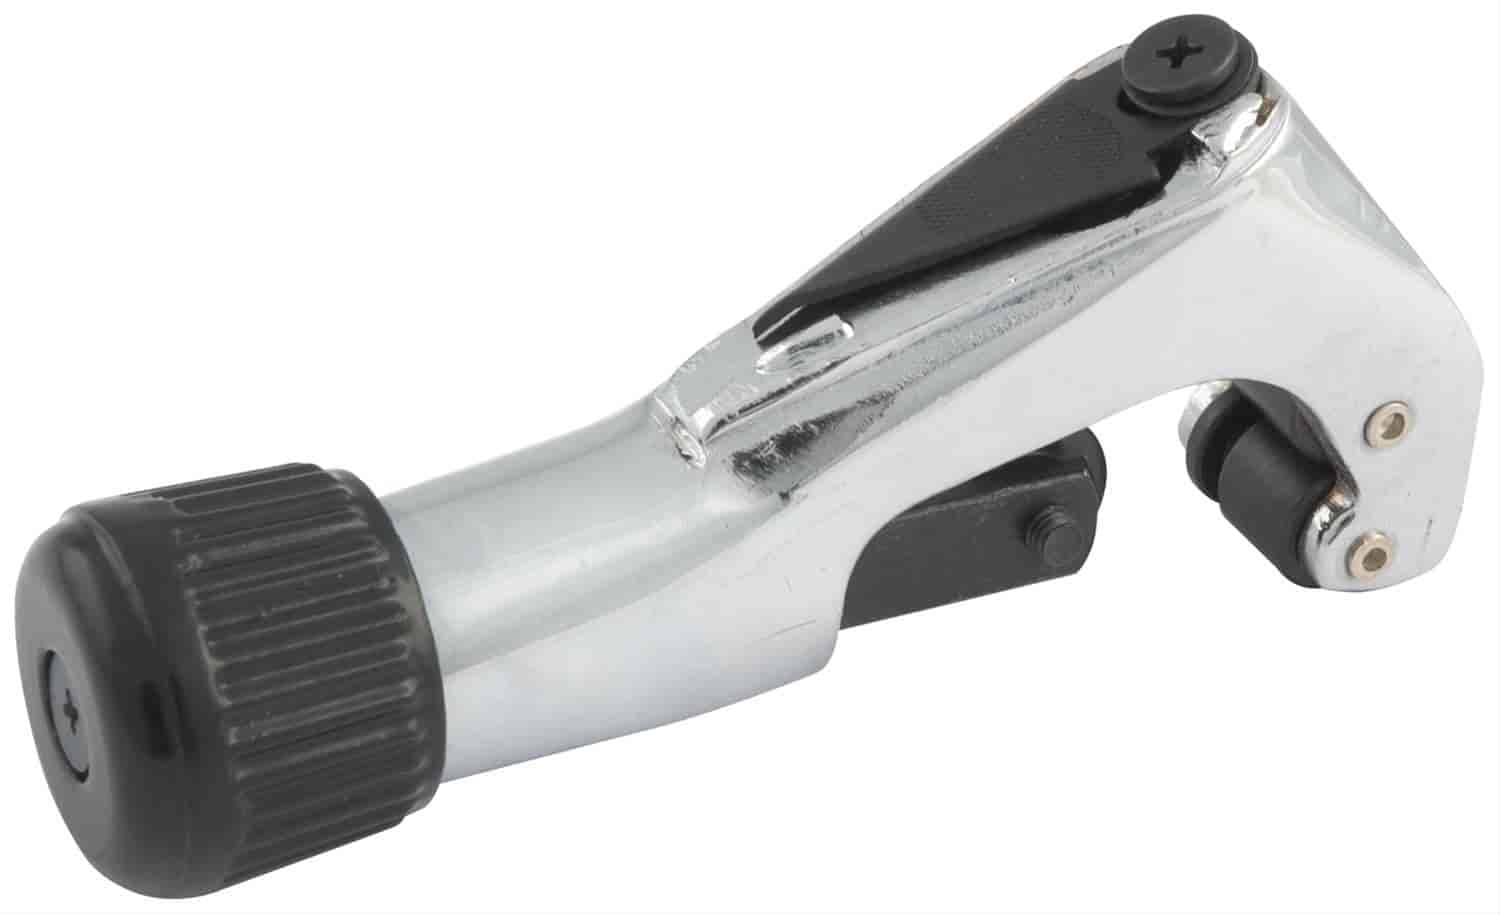 Standard Tubing Cutter 1/8" up to 1-1/8"